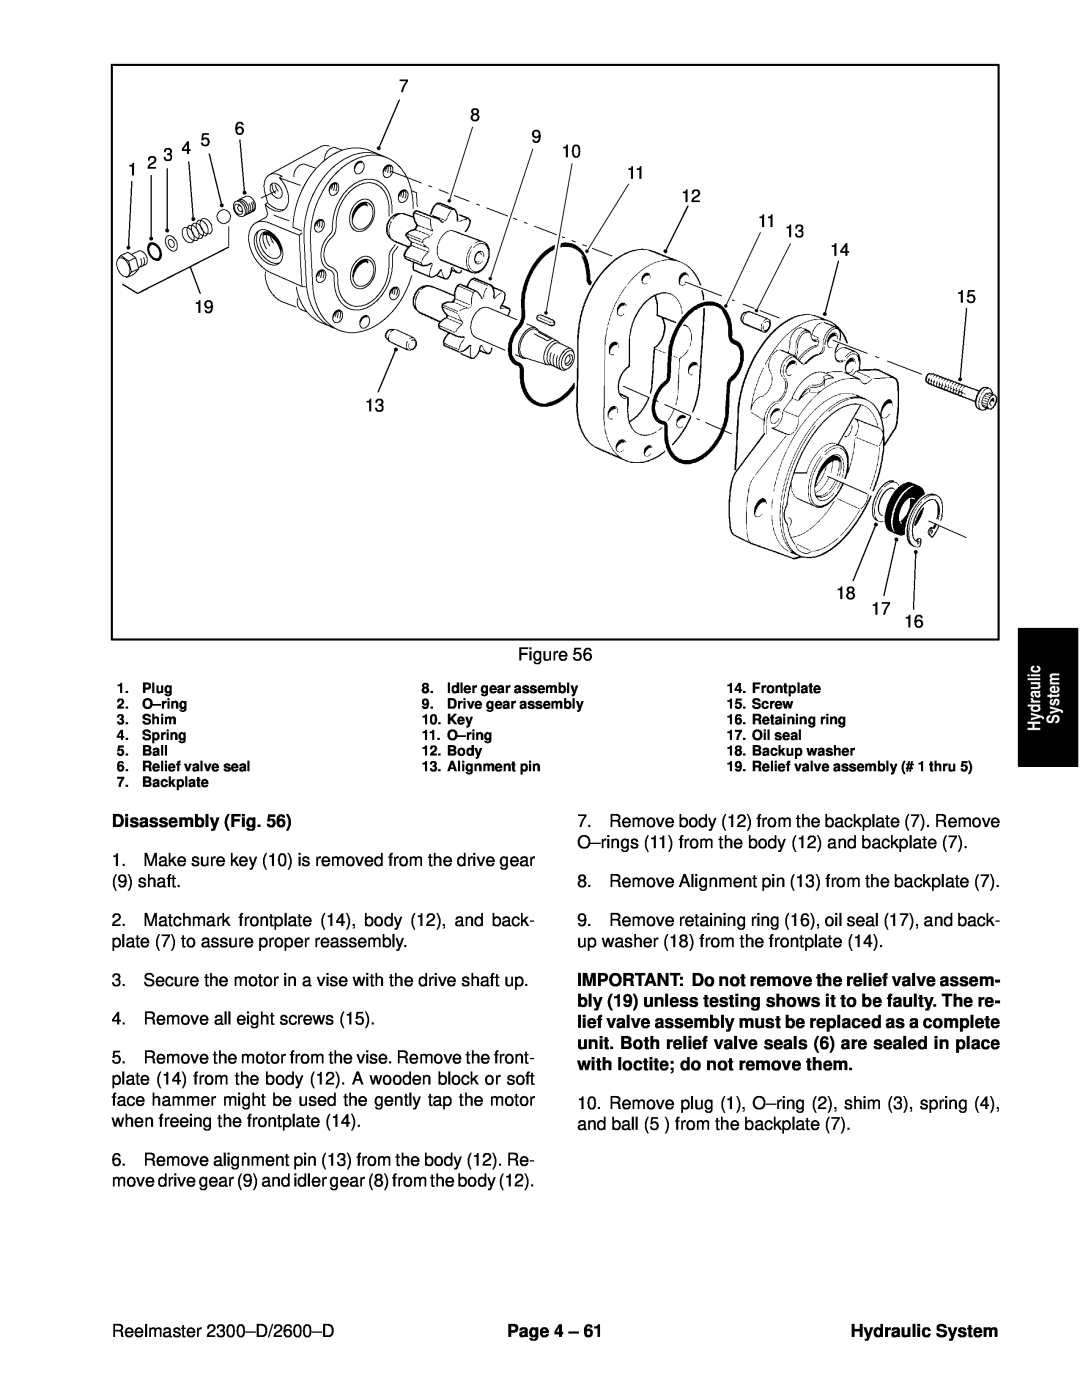 Toro 2600D Disassembly Fig, Make sure key 10 is removed from the drive gear 9 shaft, Reelmaster 2300±D/2600±D, Page 4 ± 